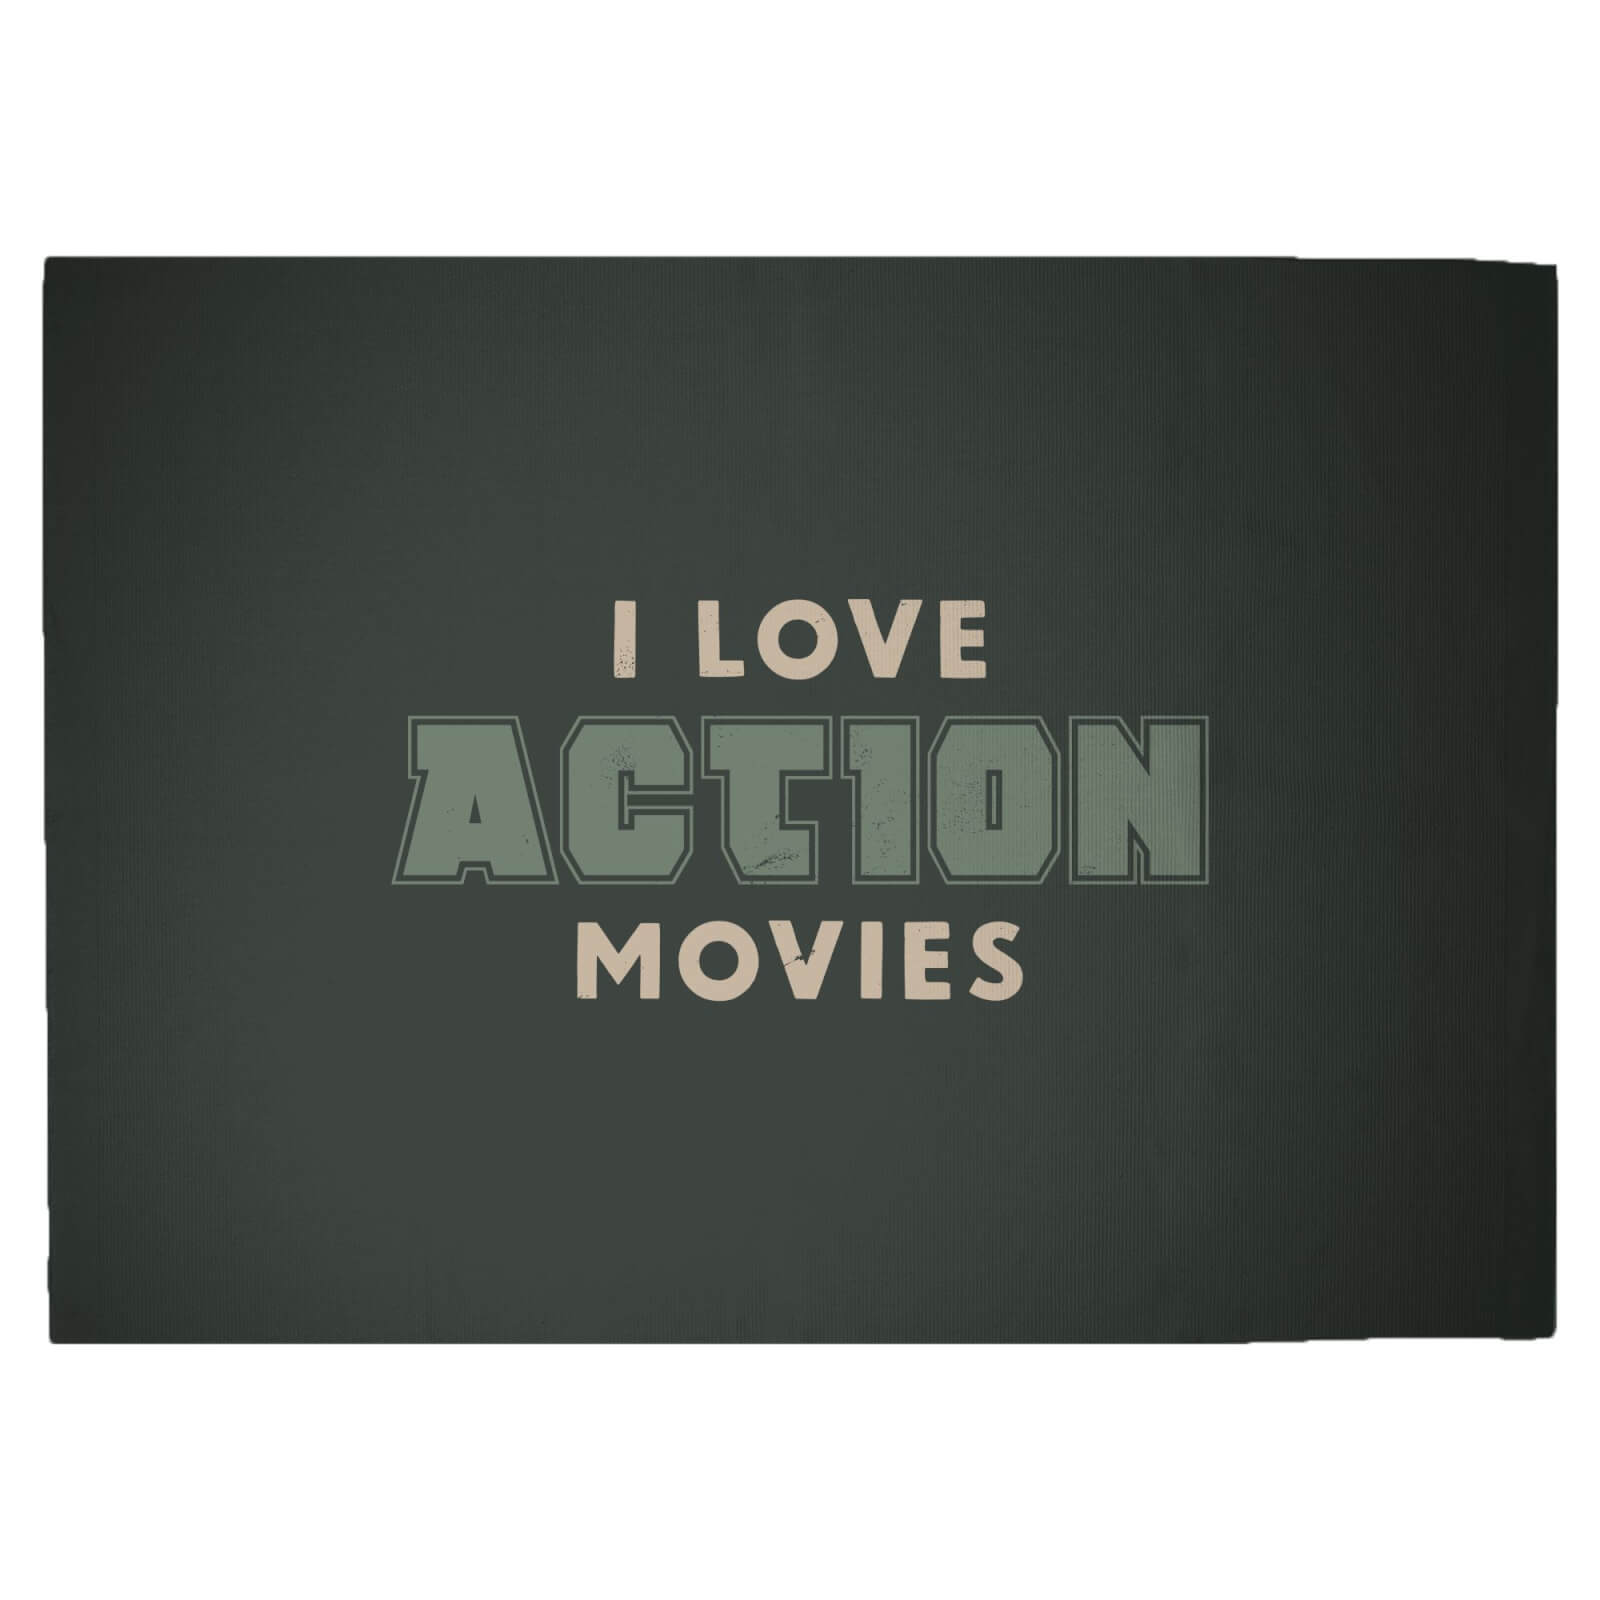 I Love Action Movies Woven Rug - Large